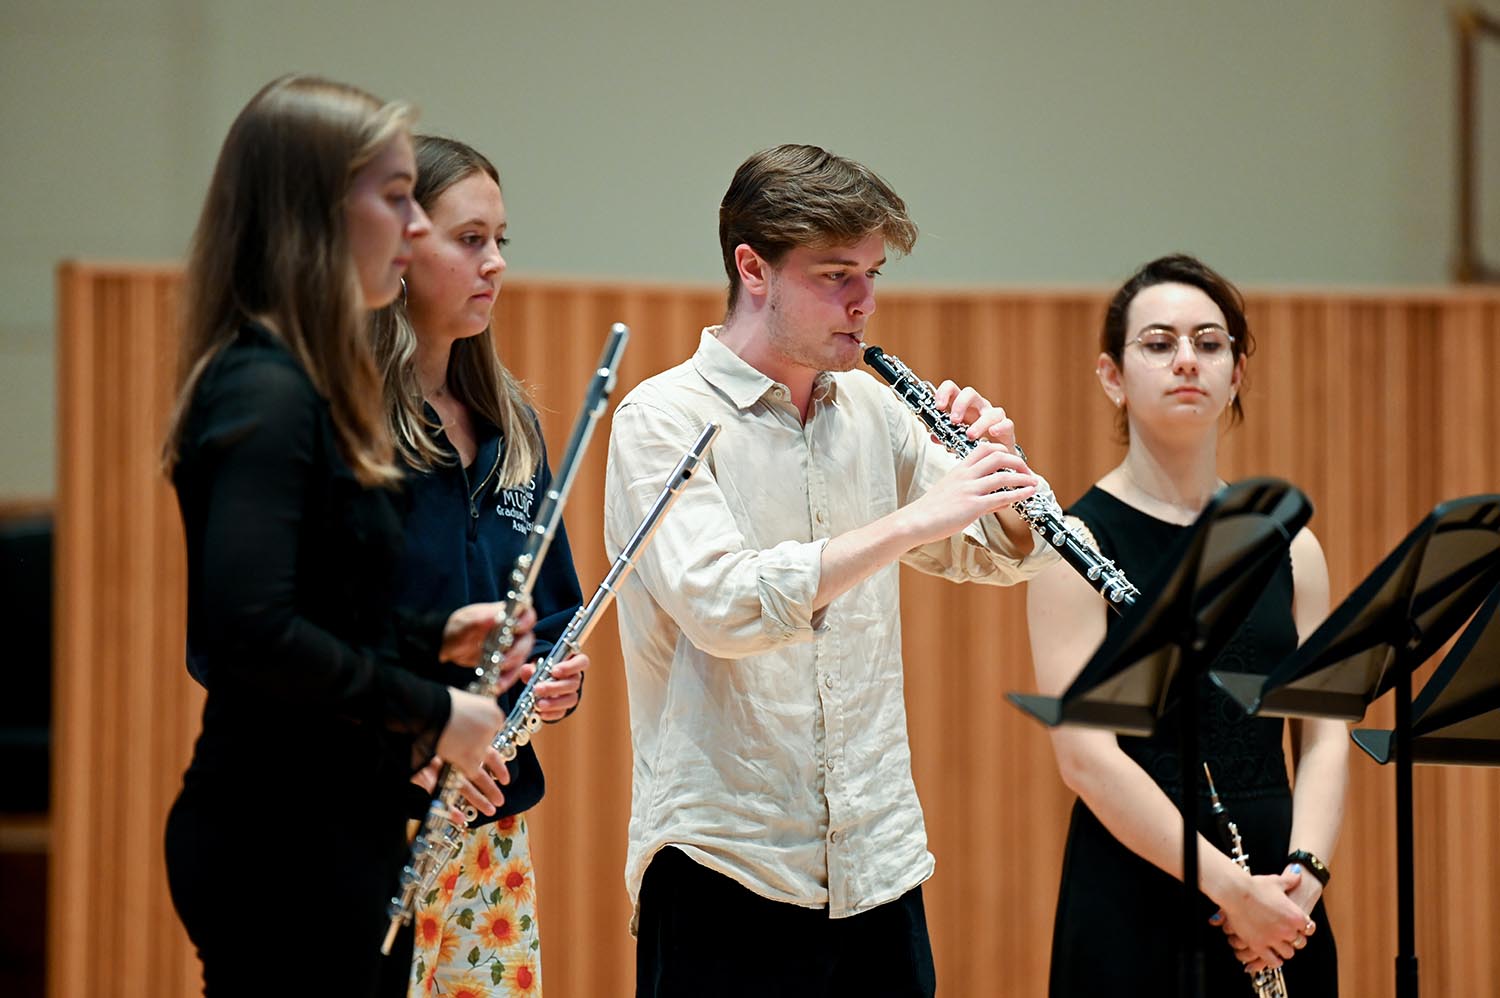 Four wind musicians perform on stage with the focus on a man playing an oboe